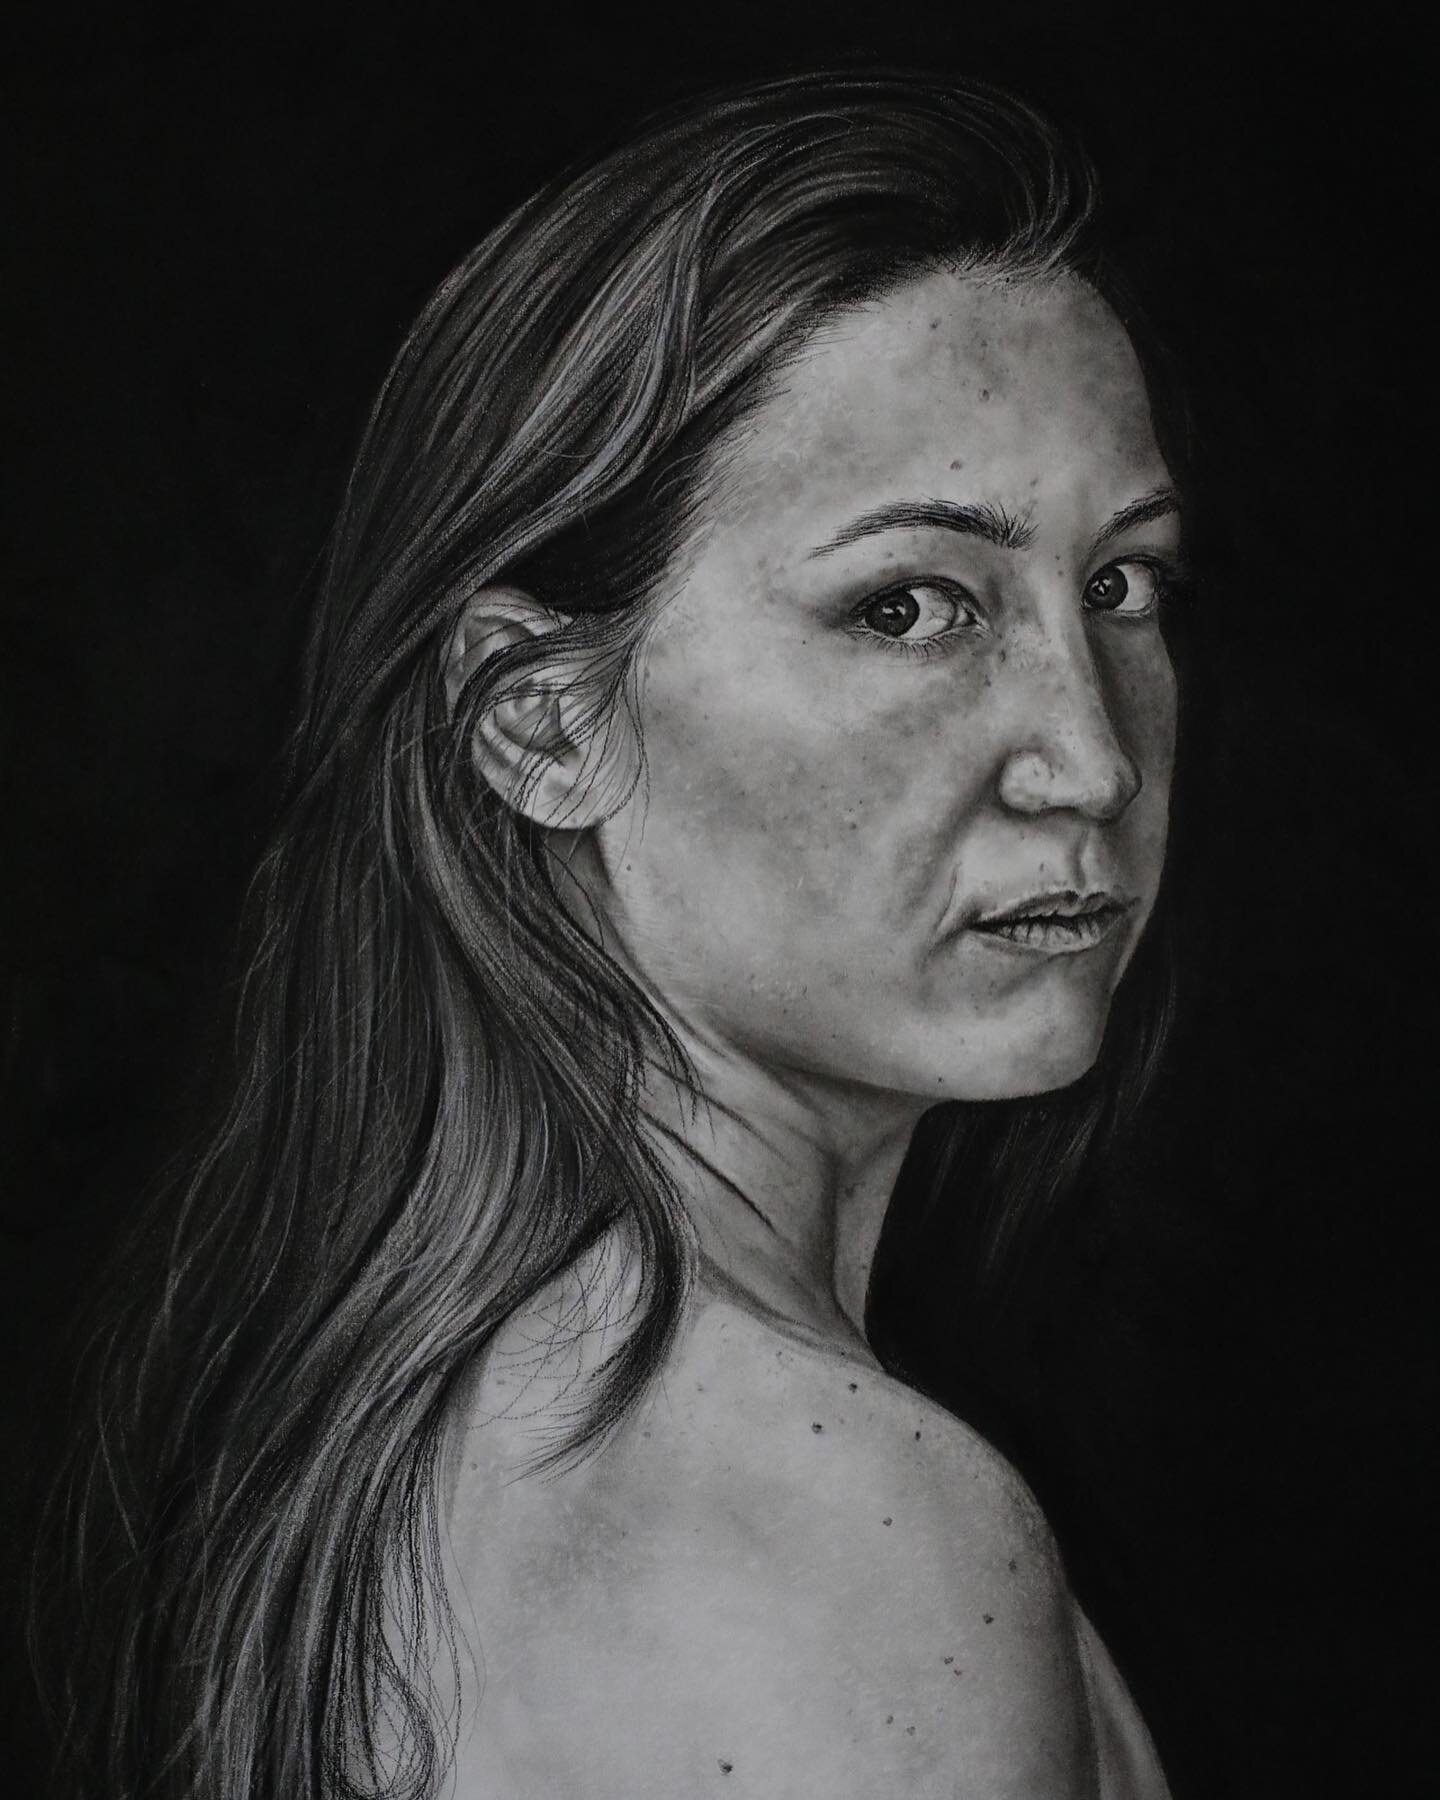 &lsquo;Self Portrait&rsquo;

In the newest series of &lsquo;Larger than life&rsquo; 

The true essence of one&rsquo;s natural self. #thisisme 

#selfportrait #charcoal #newartwork #blackandwhite #thisisme